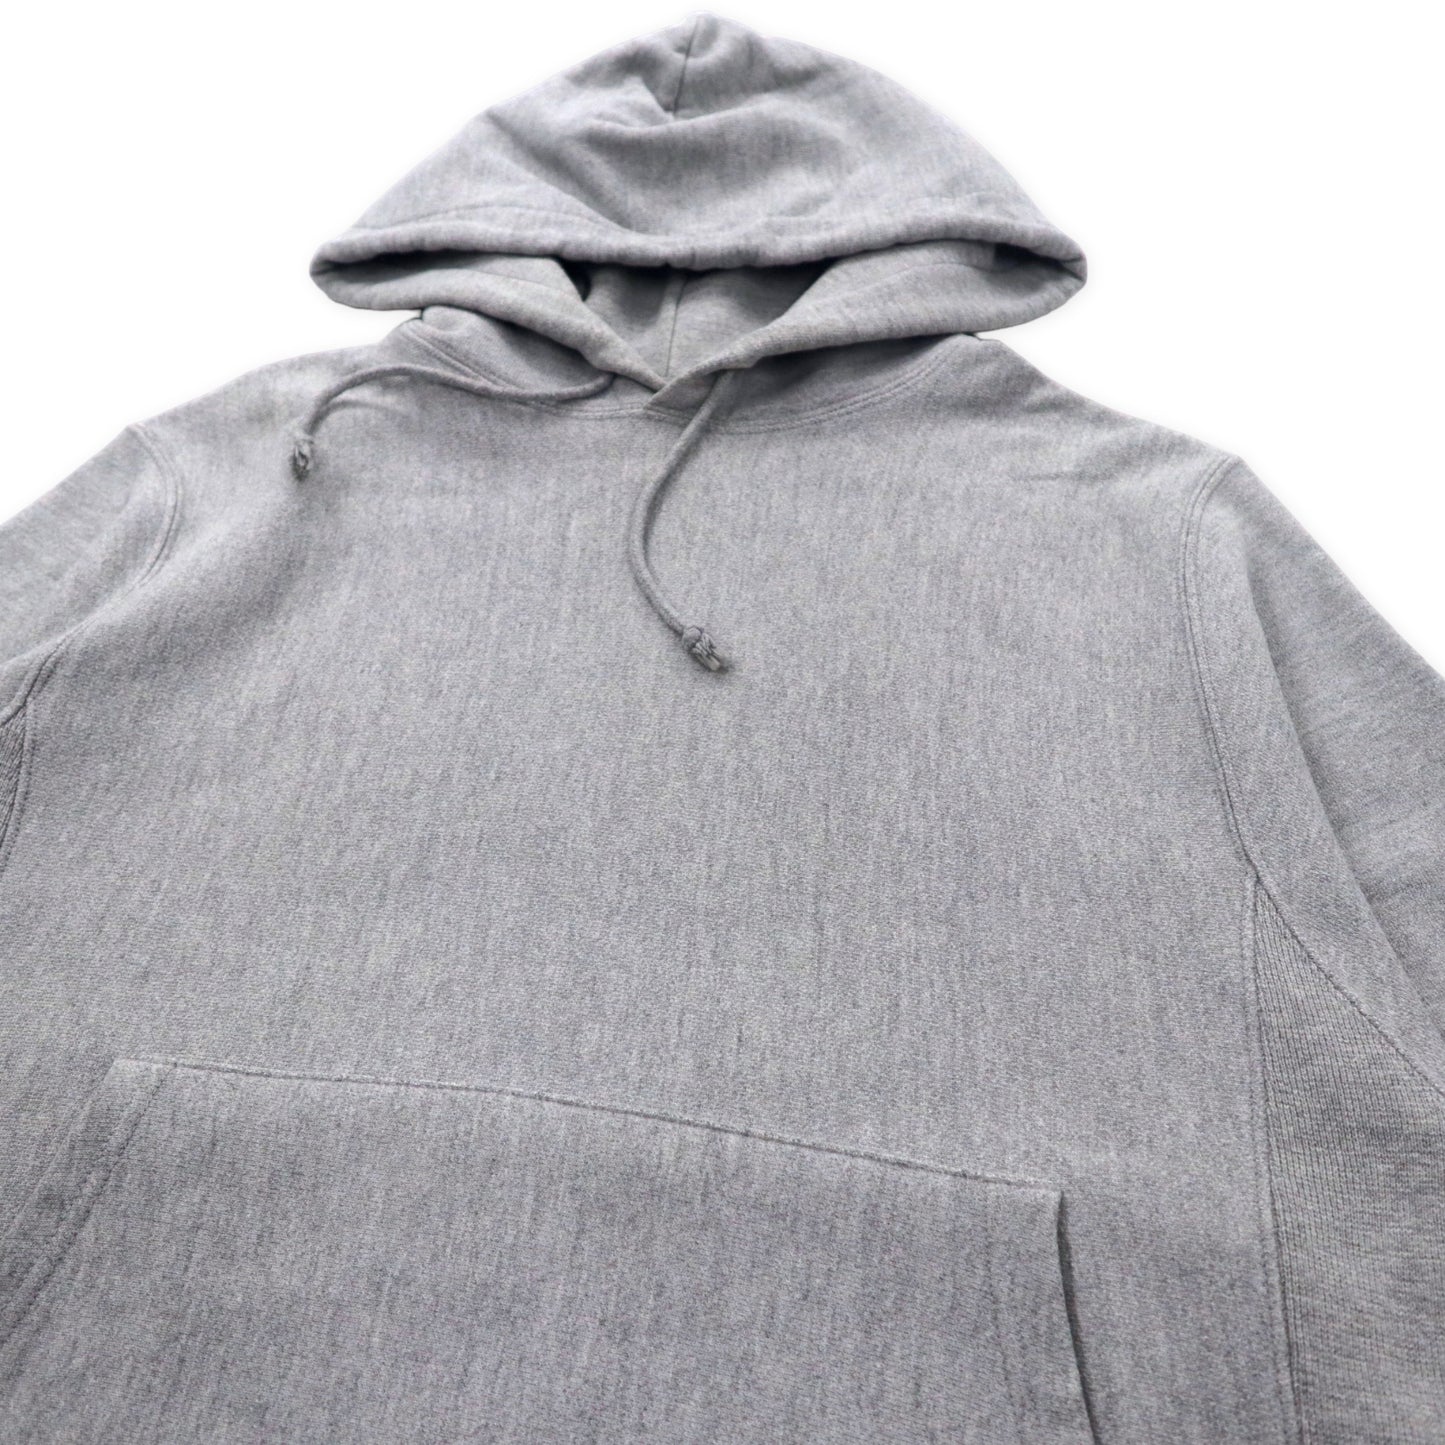 Champion Big Size Reverse Weave HOODIE S Gray Cotton BRUSHED 